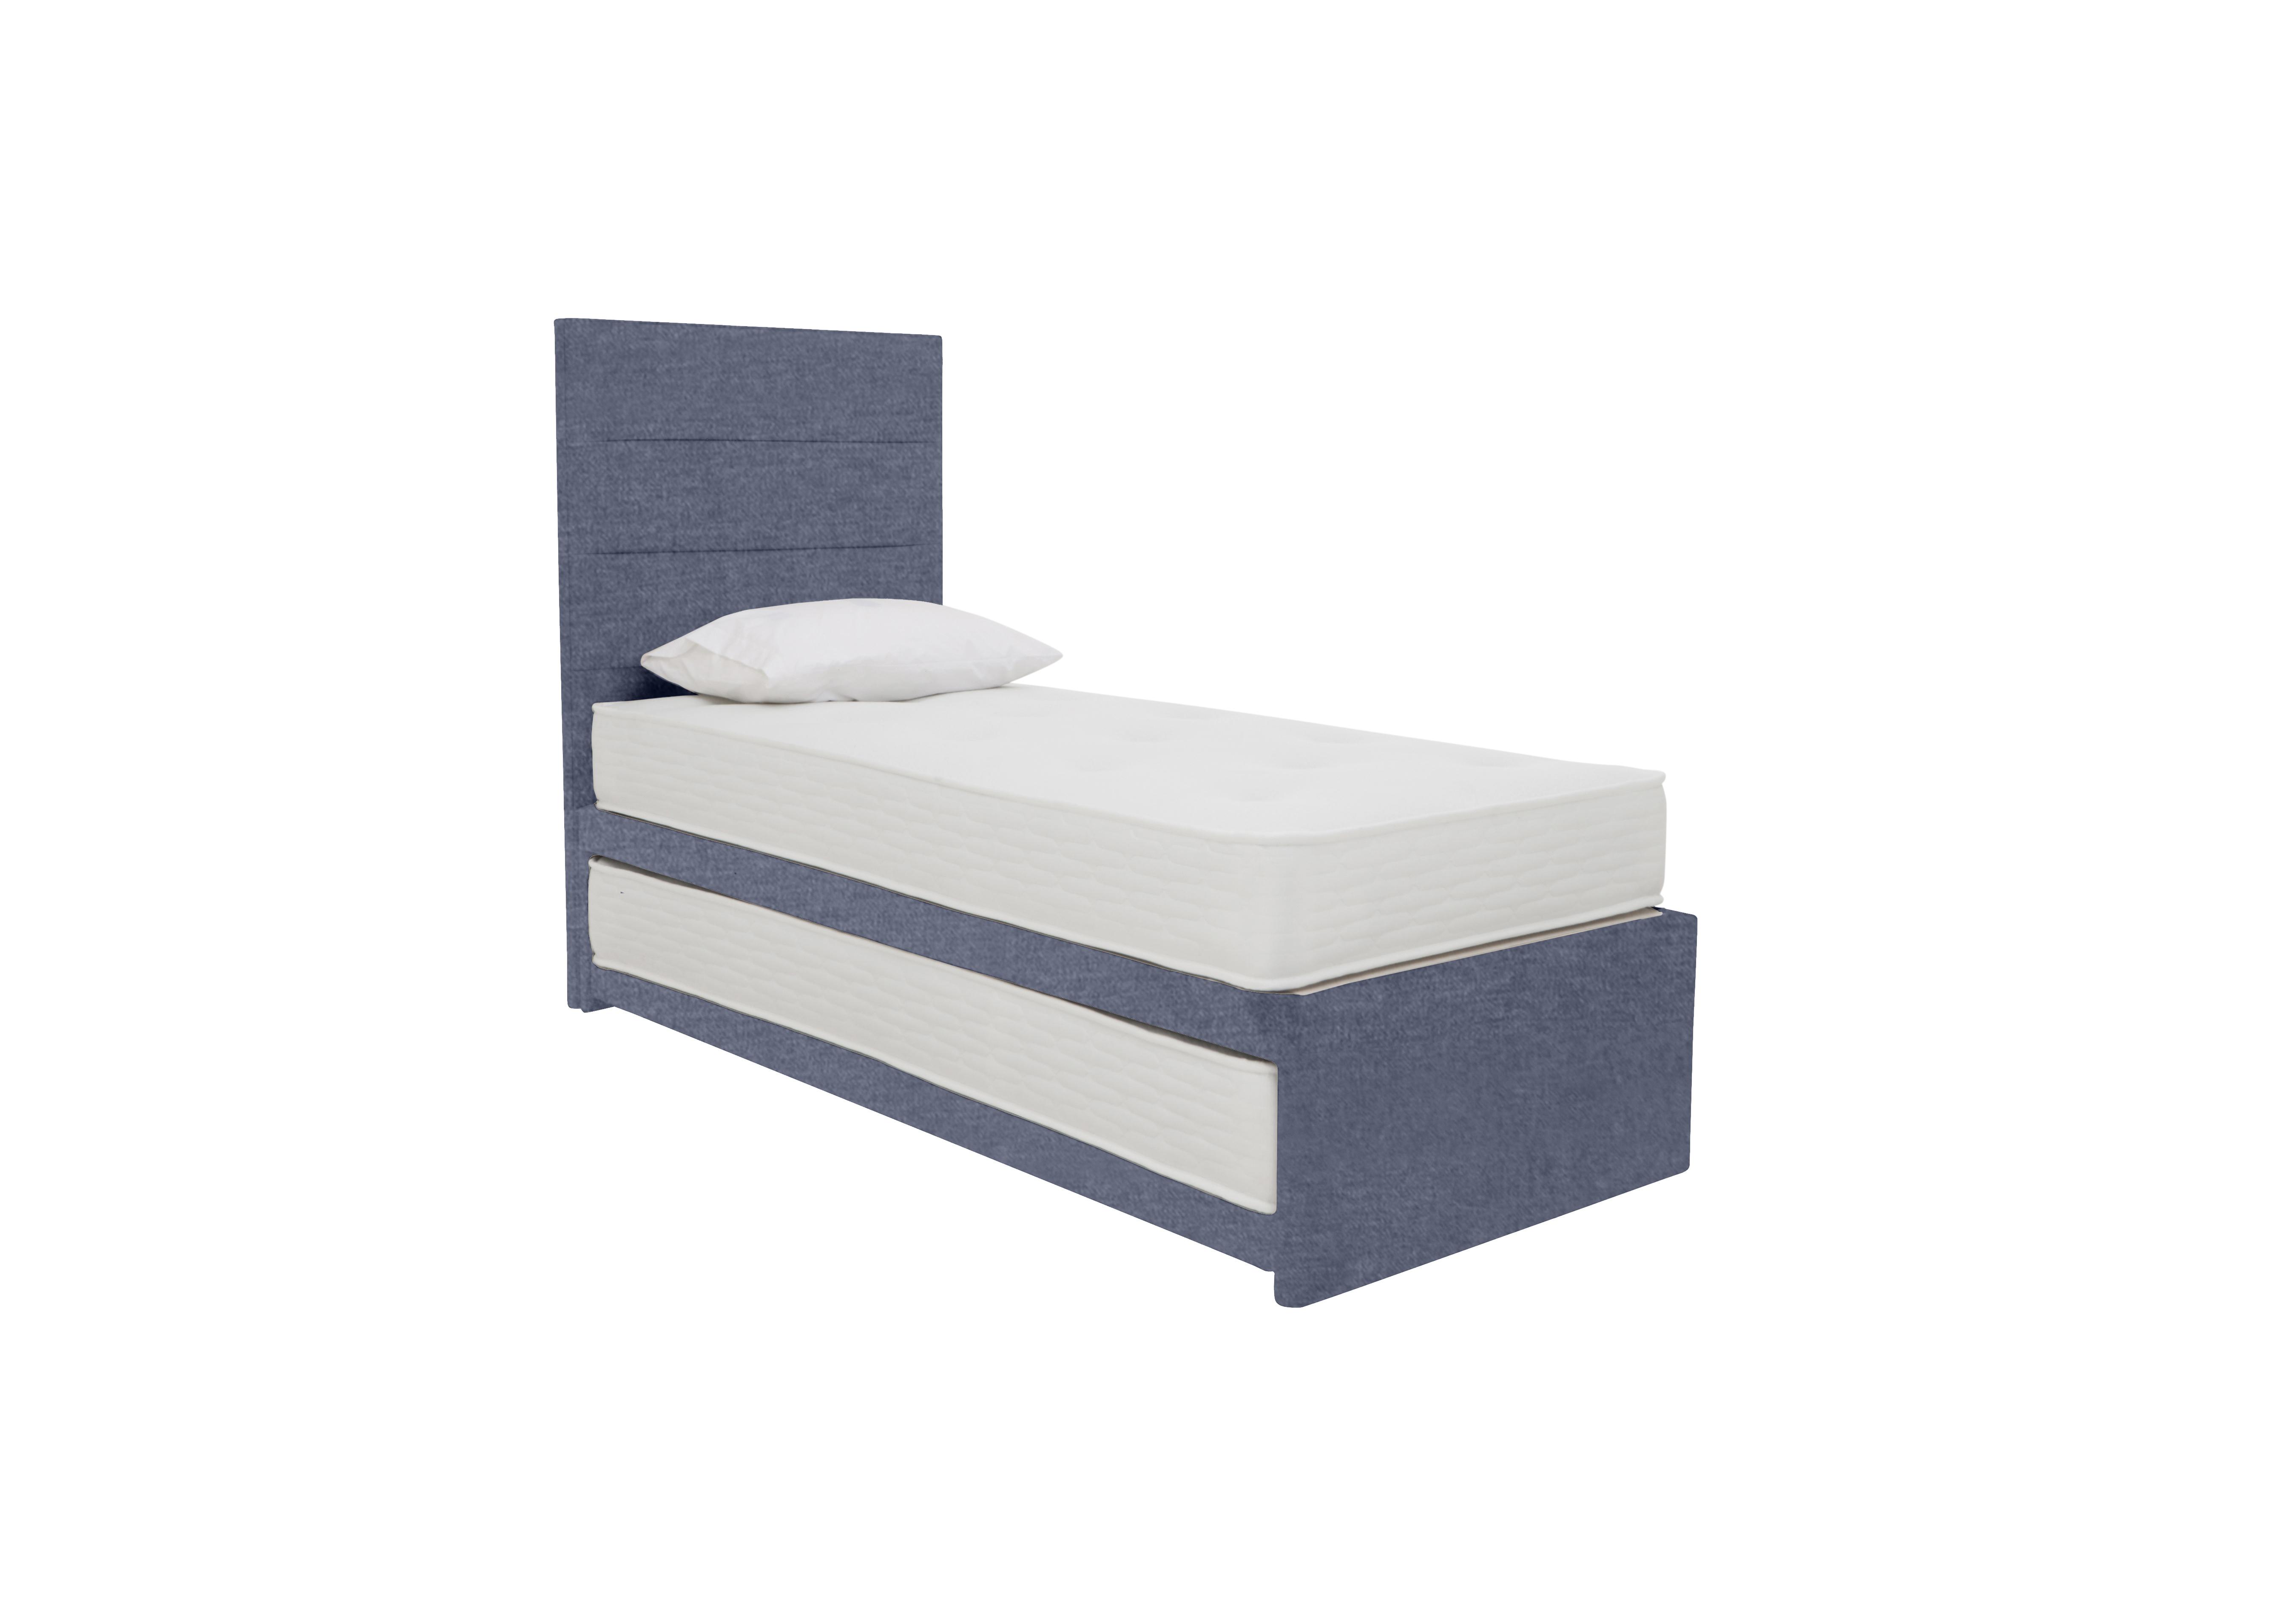 Guest Bed with Coil Mattress in Grace Marine on Furniture Village